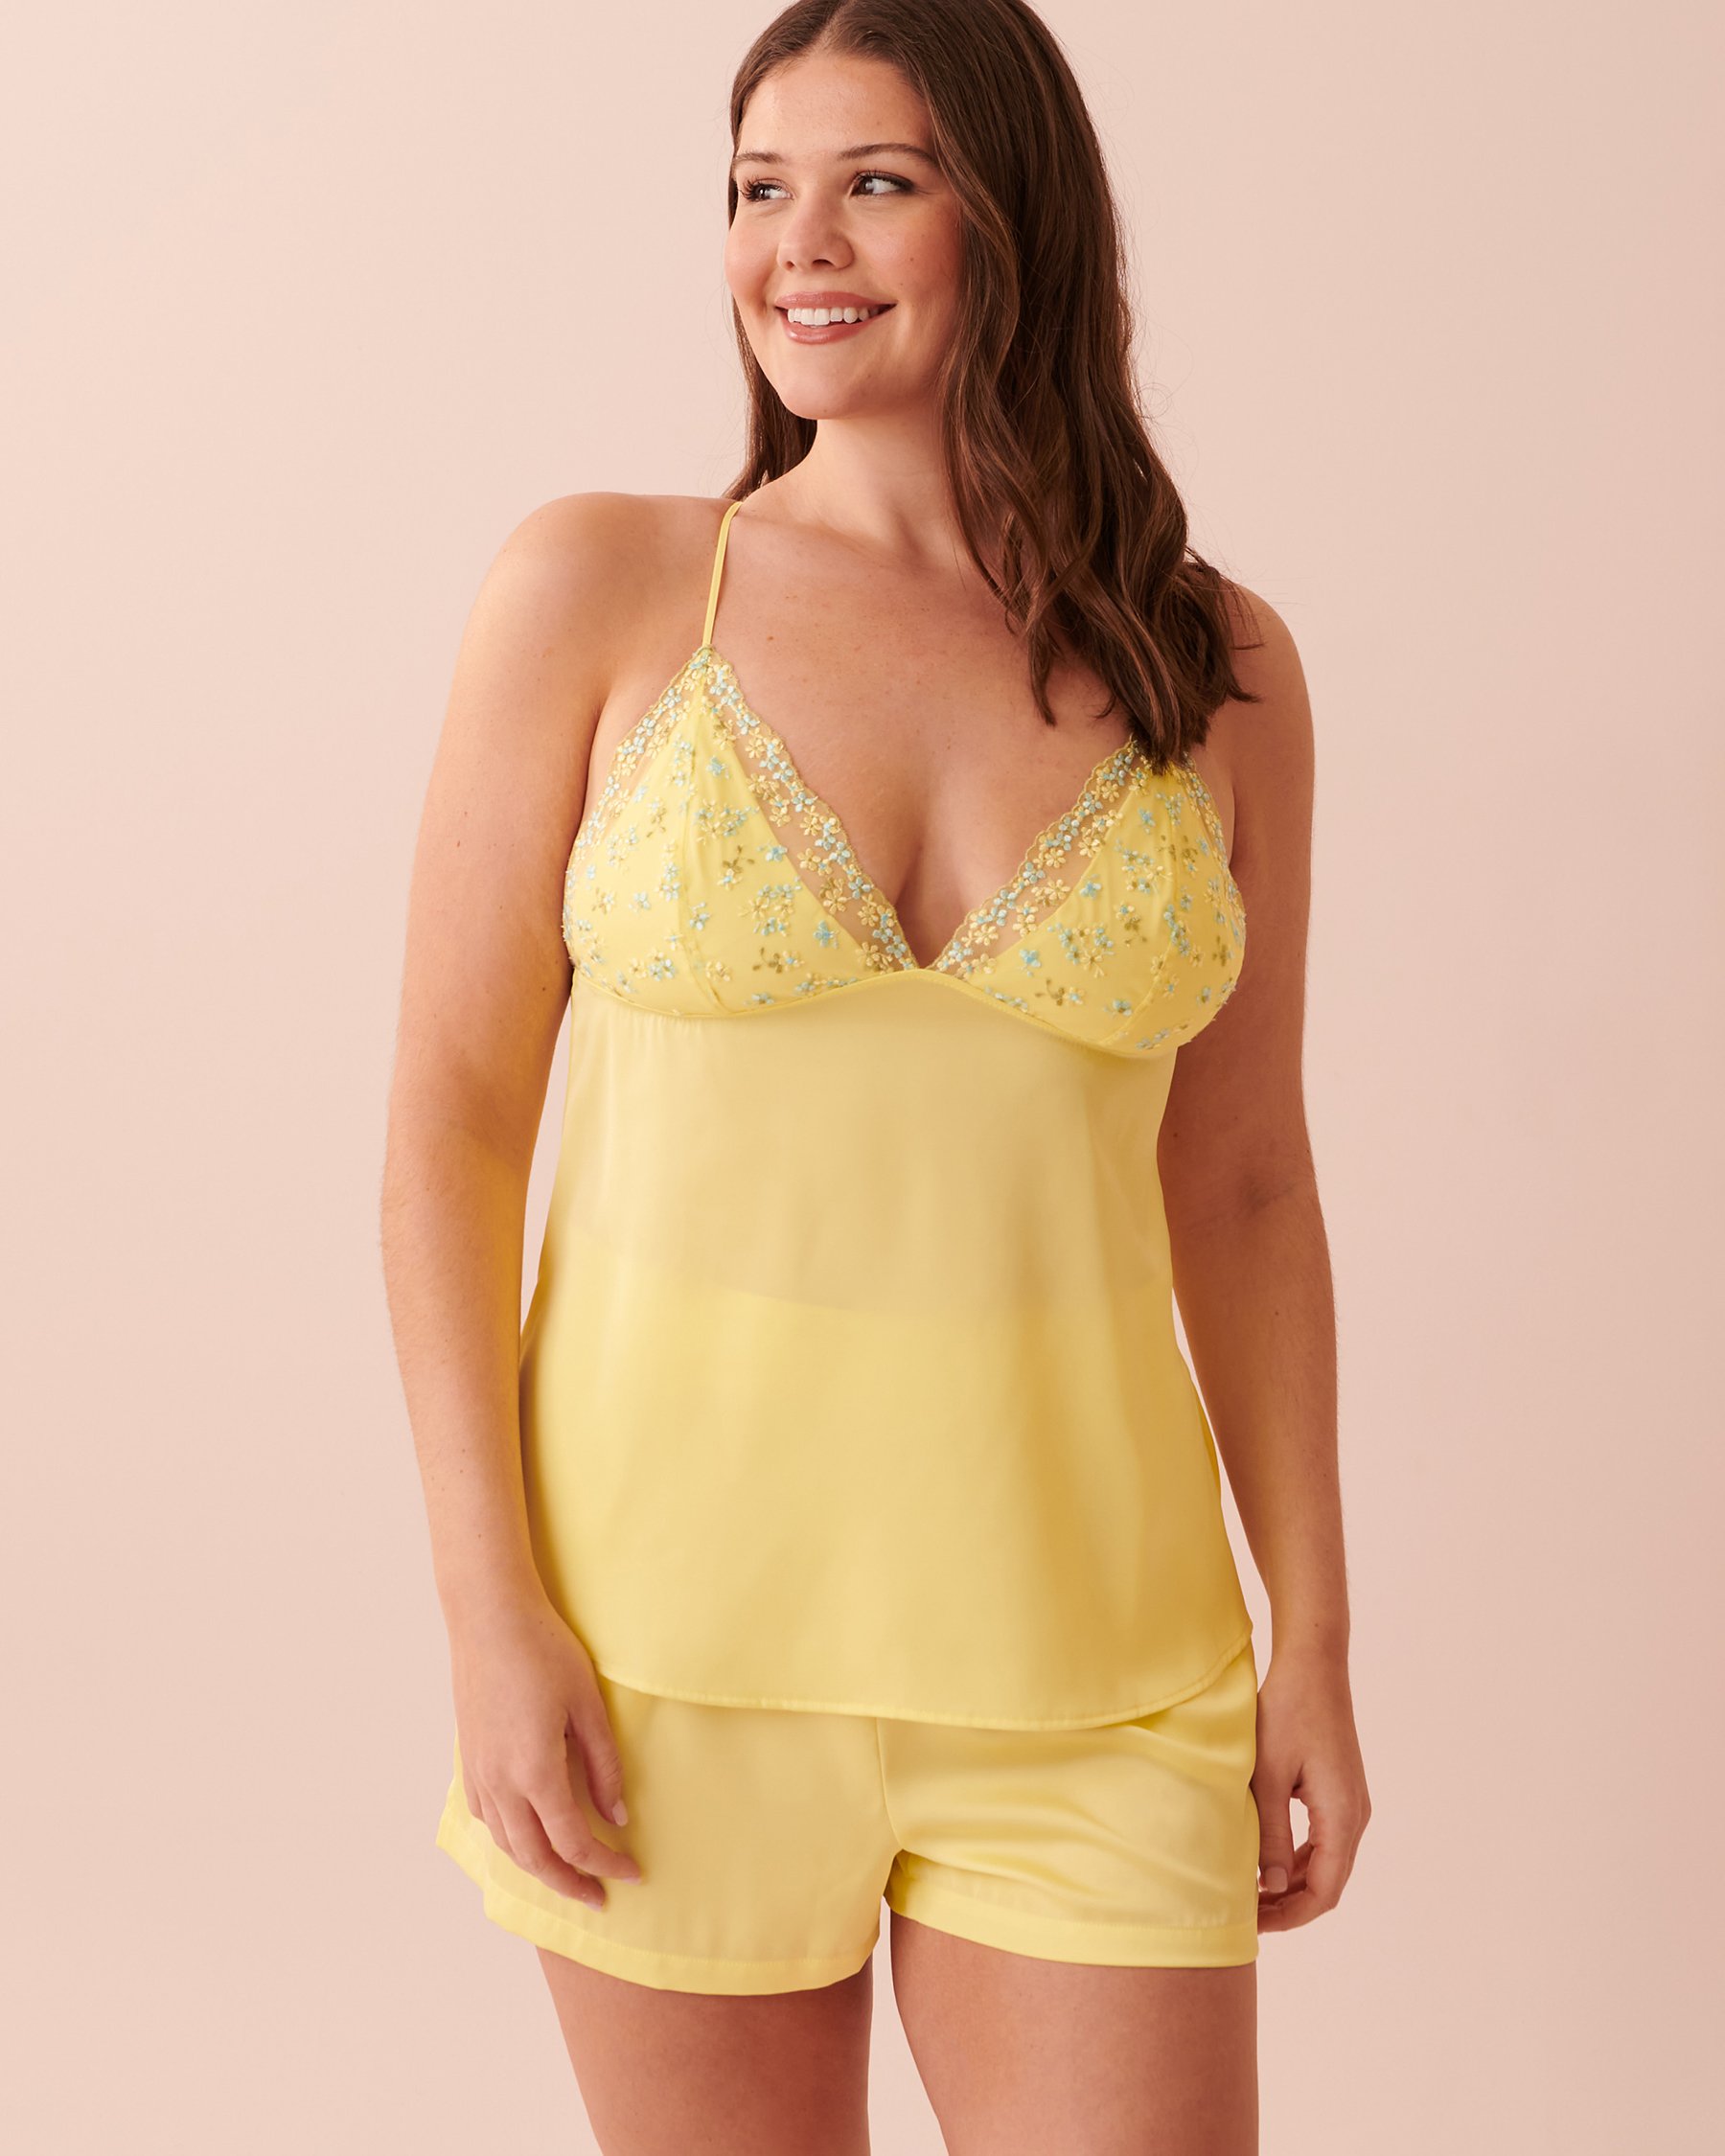 LA VIE EN ROSE Satin Cami with Embroidery Yellow embroidery 60100064 - View1